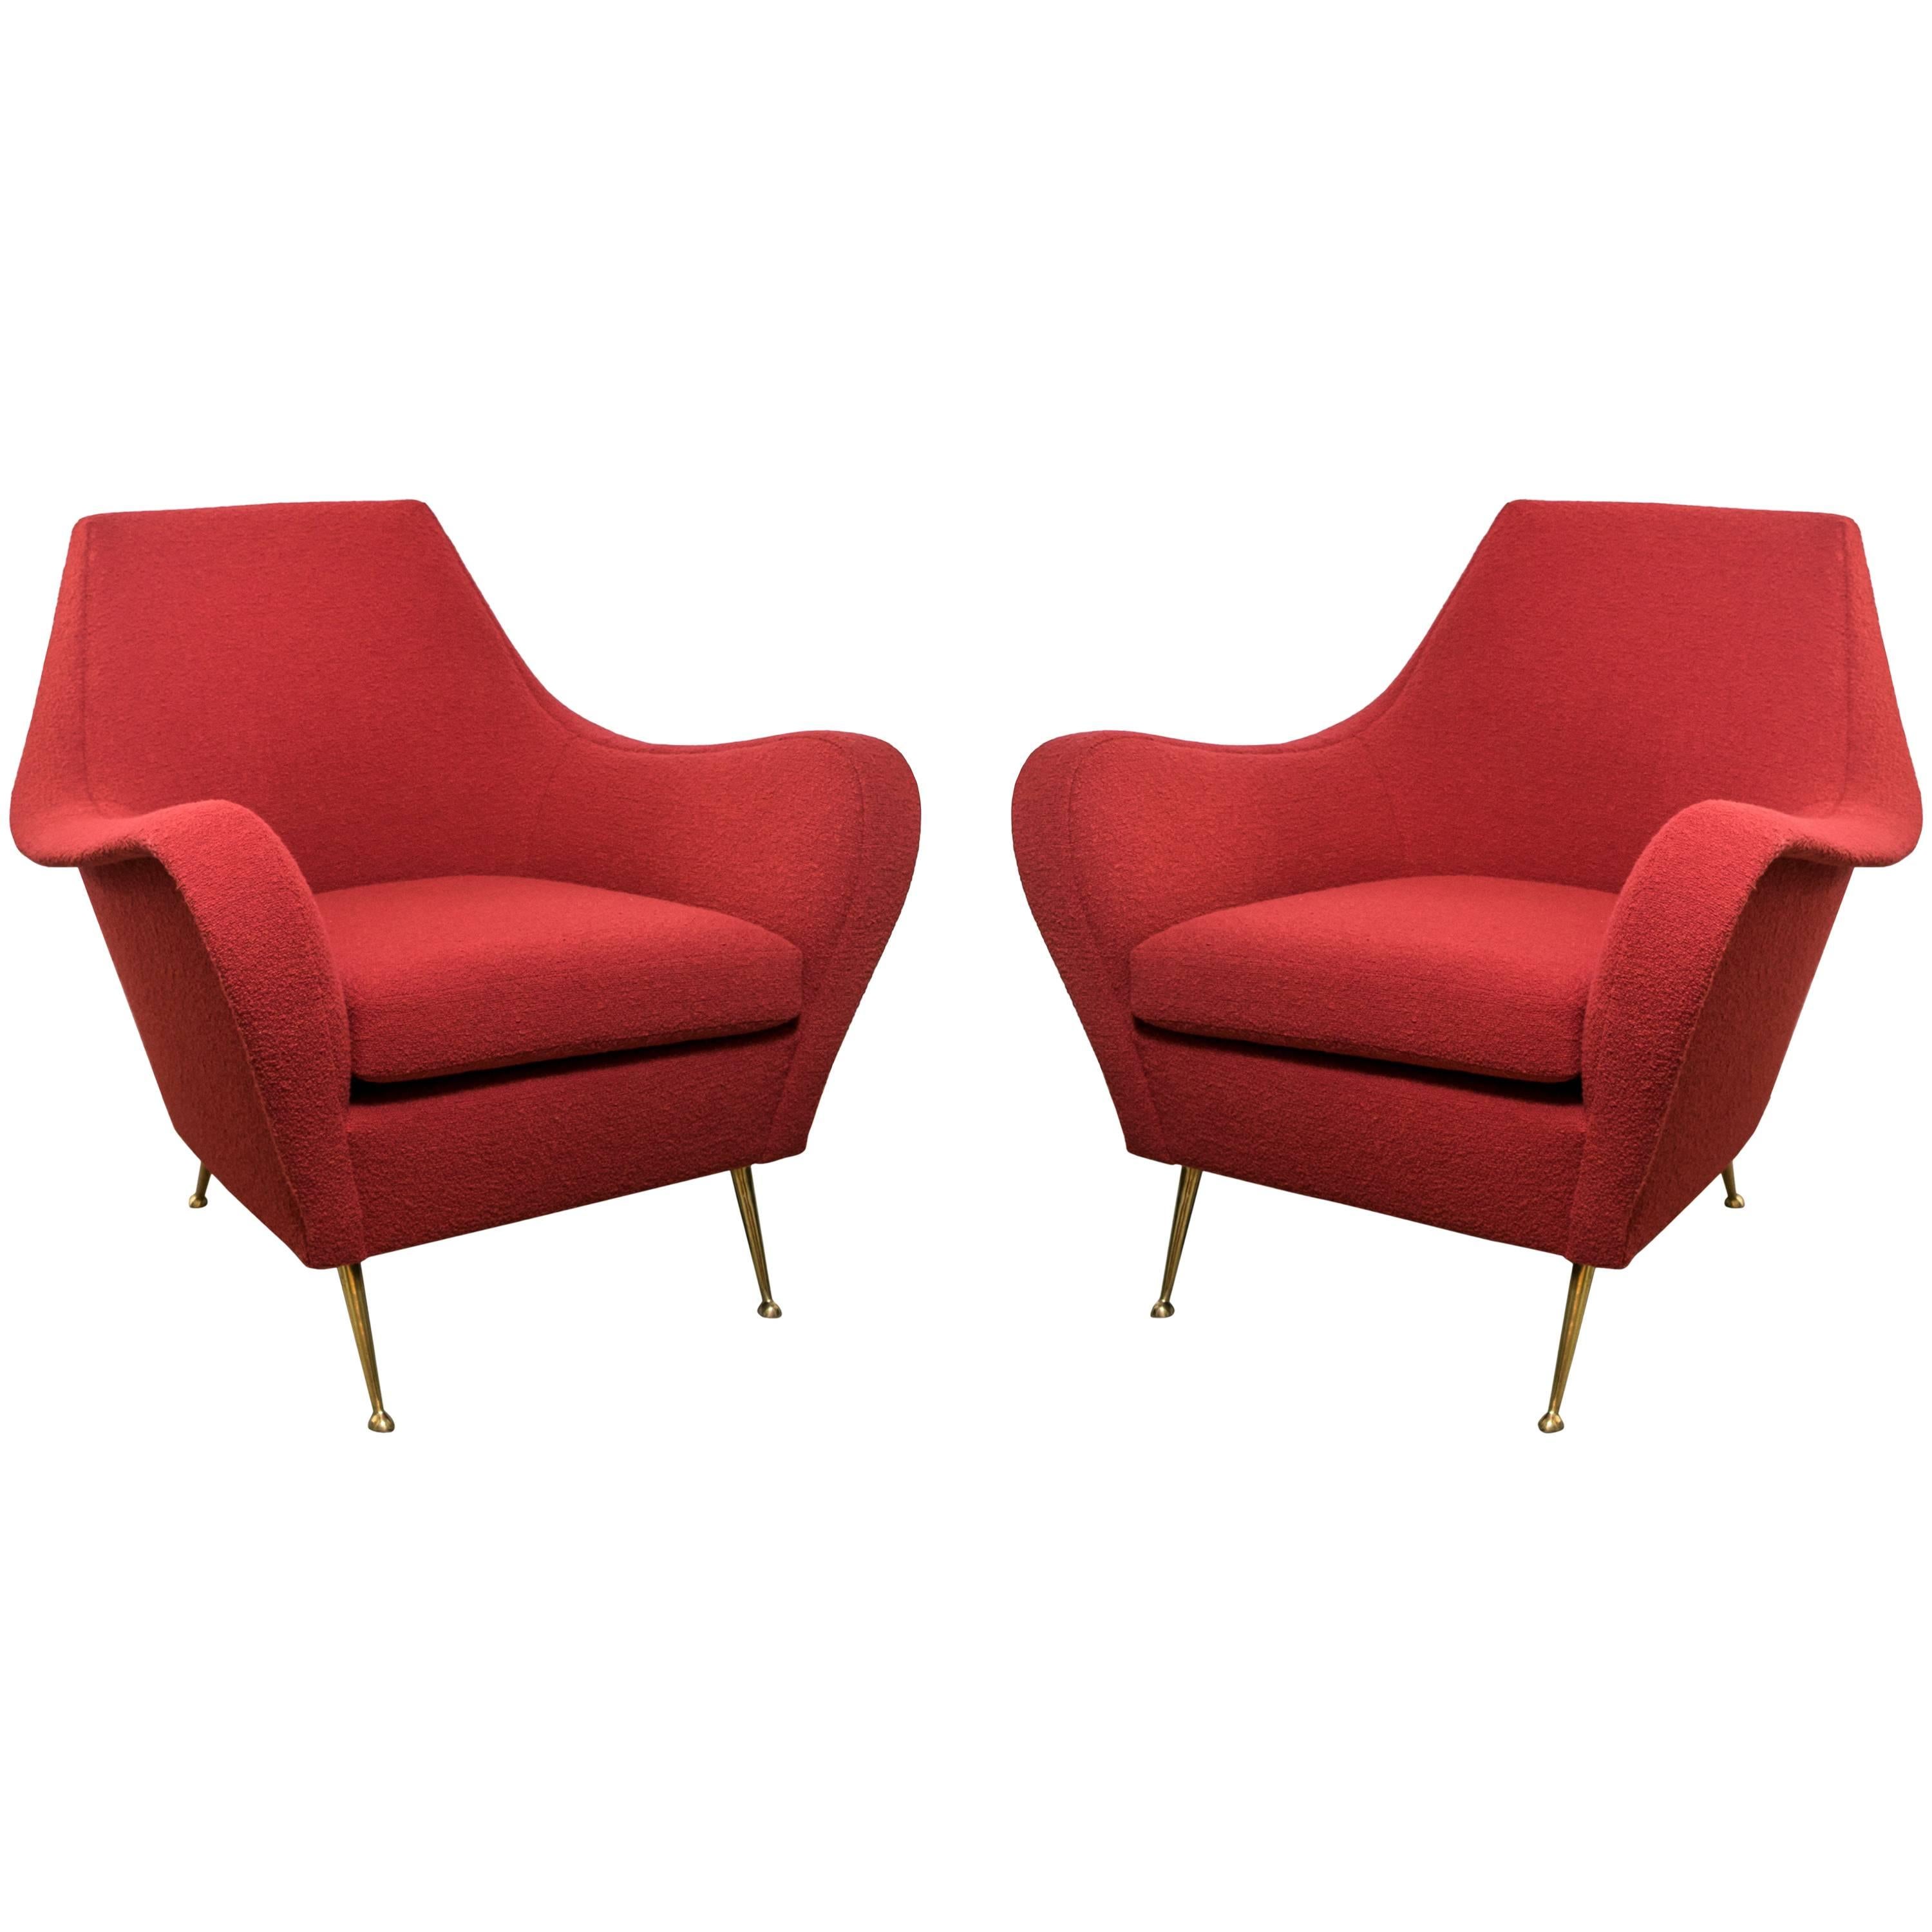 Italian Mid-Century Pair of Chairs with Brass Legs in Red Boucle